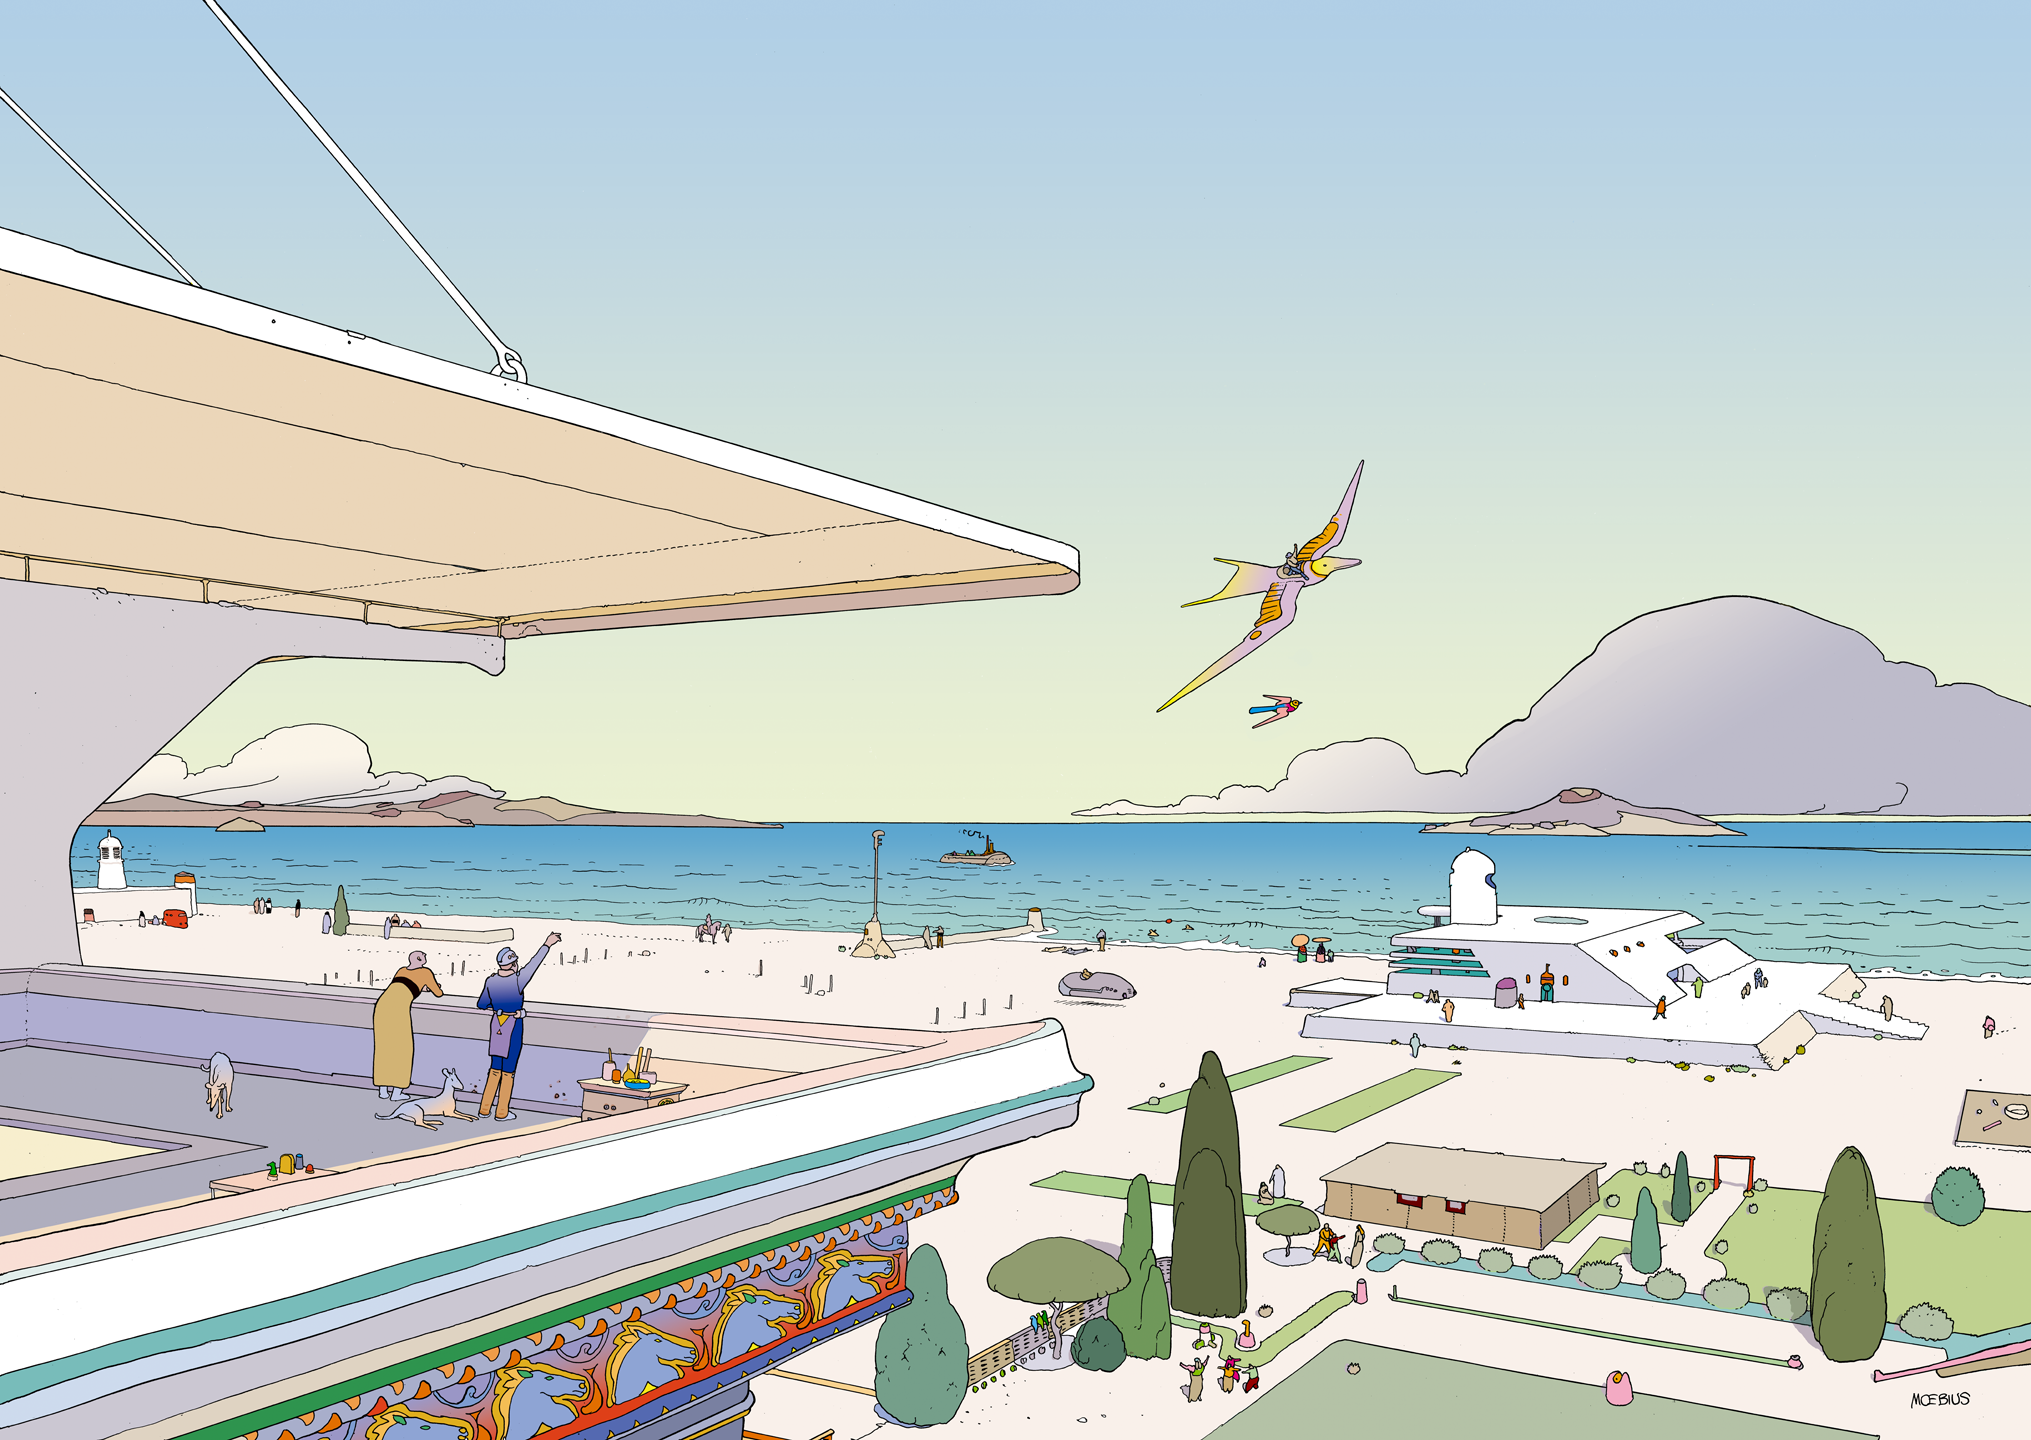 1000+ images about Moebius on Pinterest | Comic illustrations